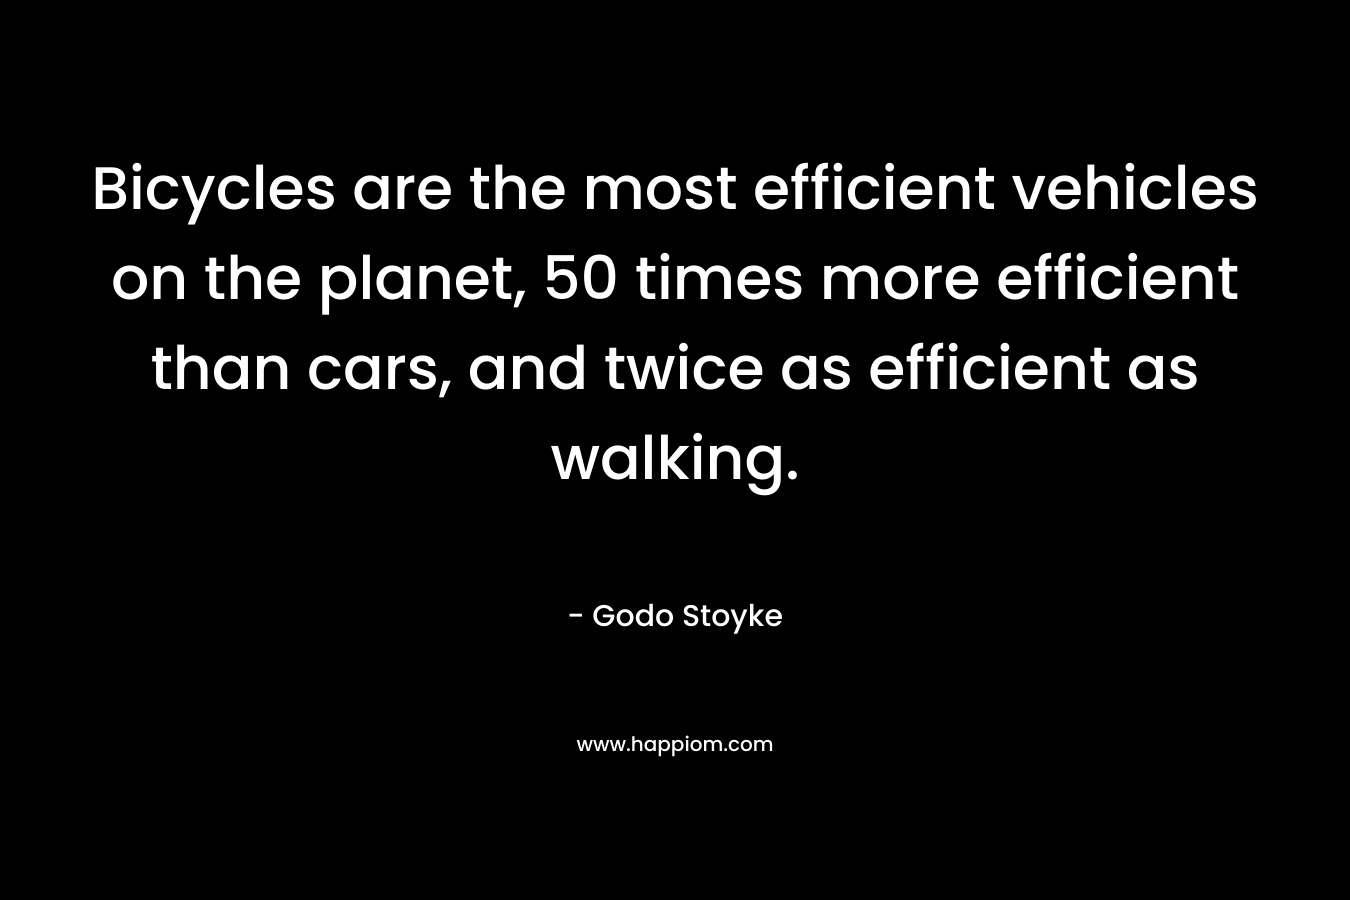 Bicycles are the most efficient vehicles on the planet, 50 times more efficient than cars, and twice as efficient as walking.